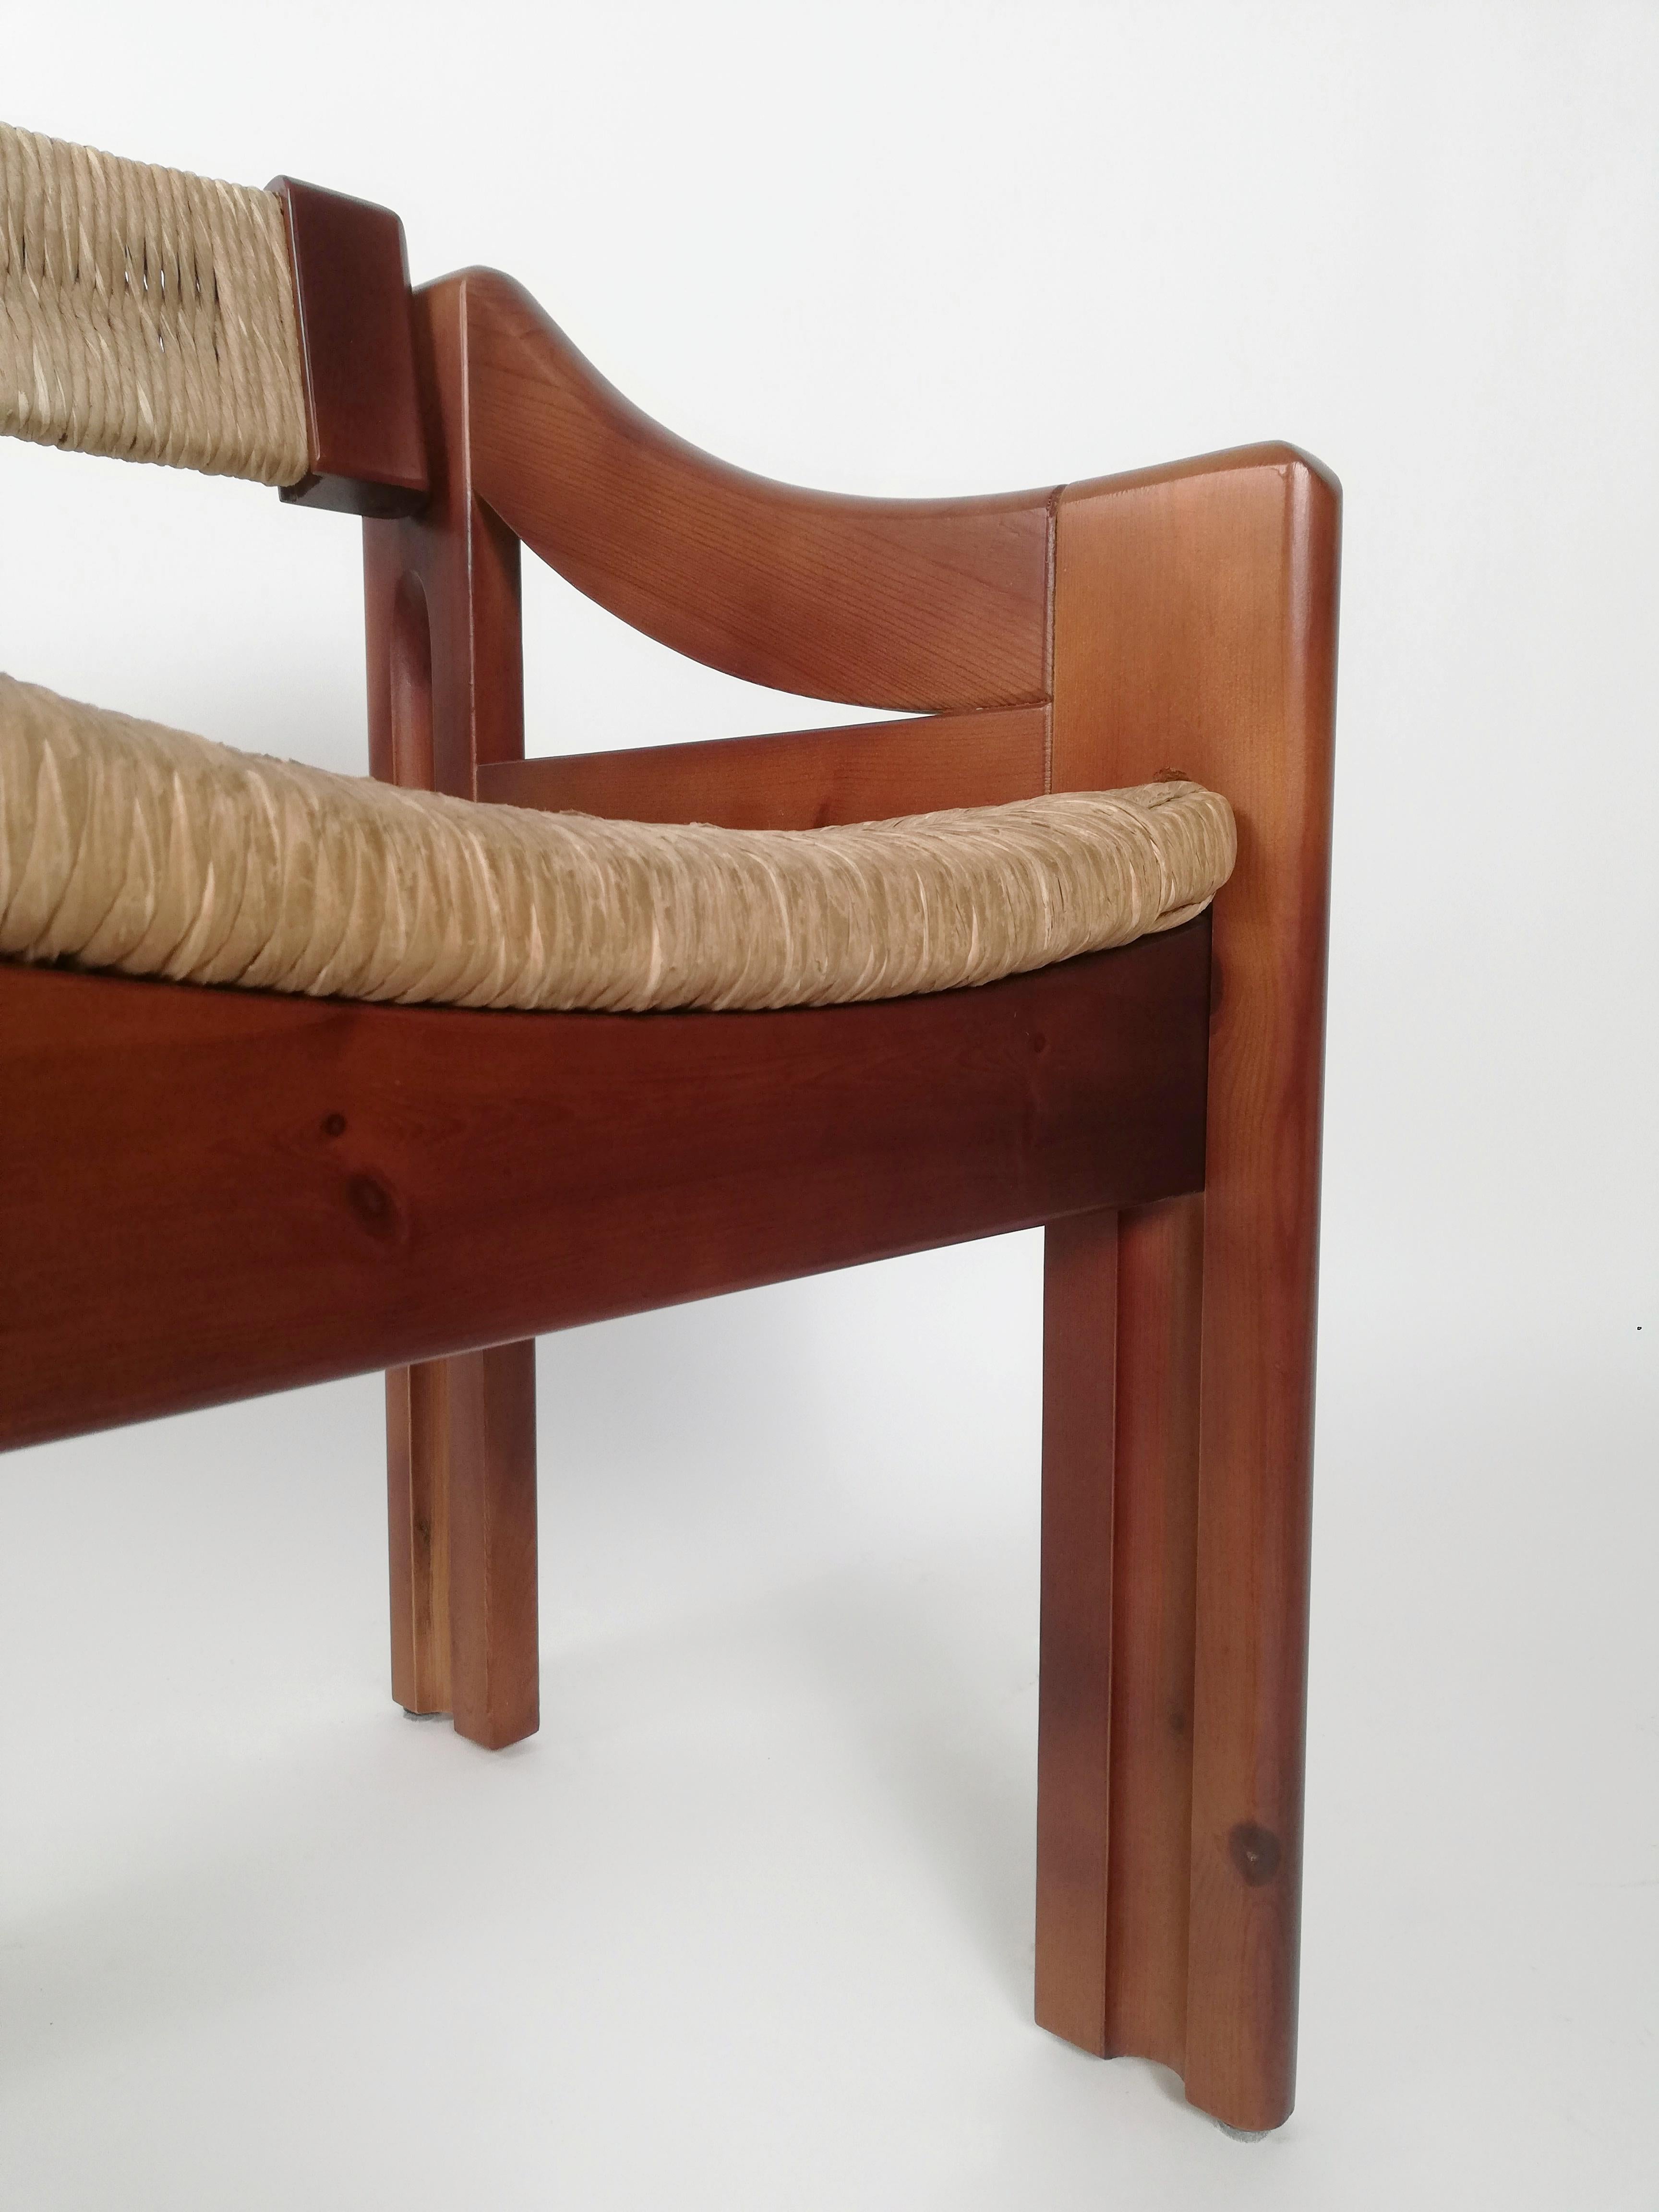 20th Century Mid-Century Brutalist Pine and Straw Chairs by Fratelli Montina, Italy, 1960s For Sale